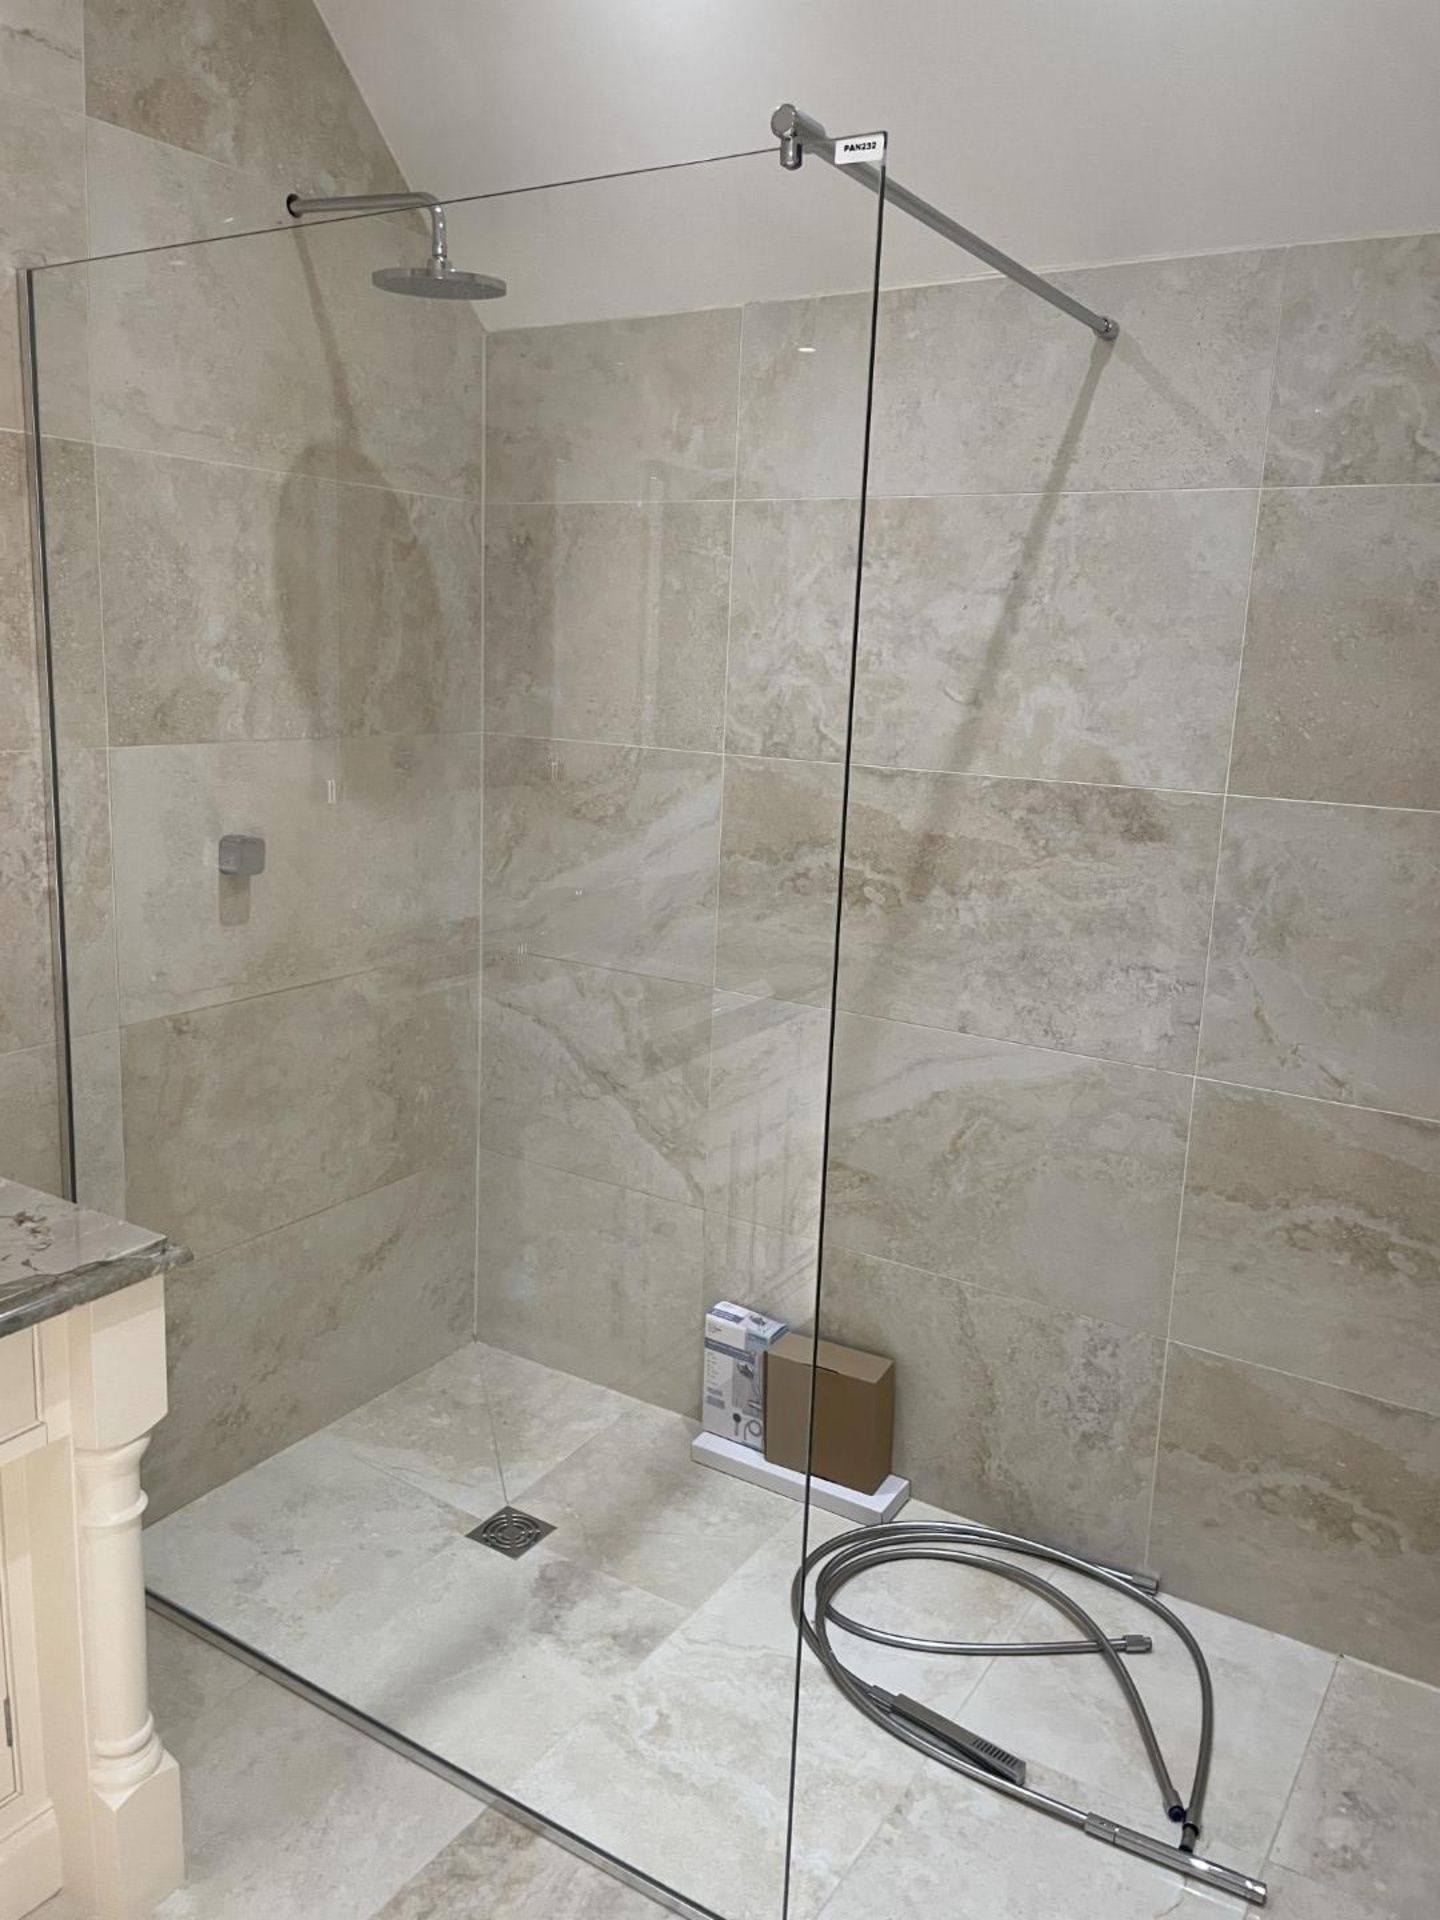 1 x Premium Shower and Enclosure + Hansgrove Controls and Thermostat - Ref: PAN232 - CL896 - NO - Image 5 of 21